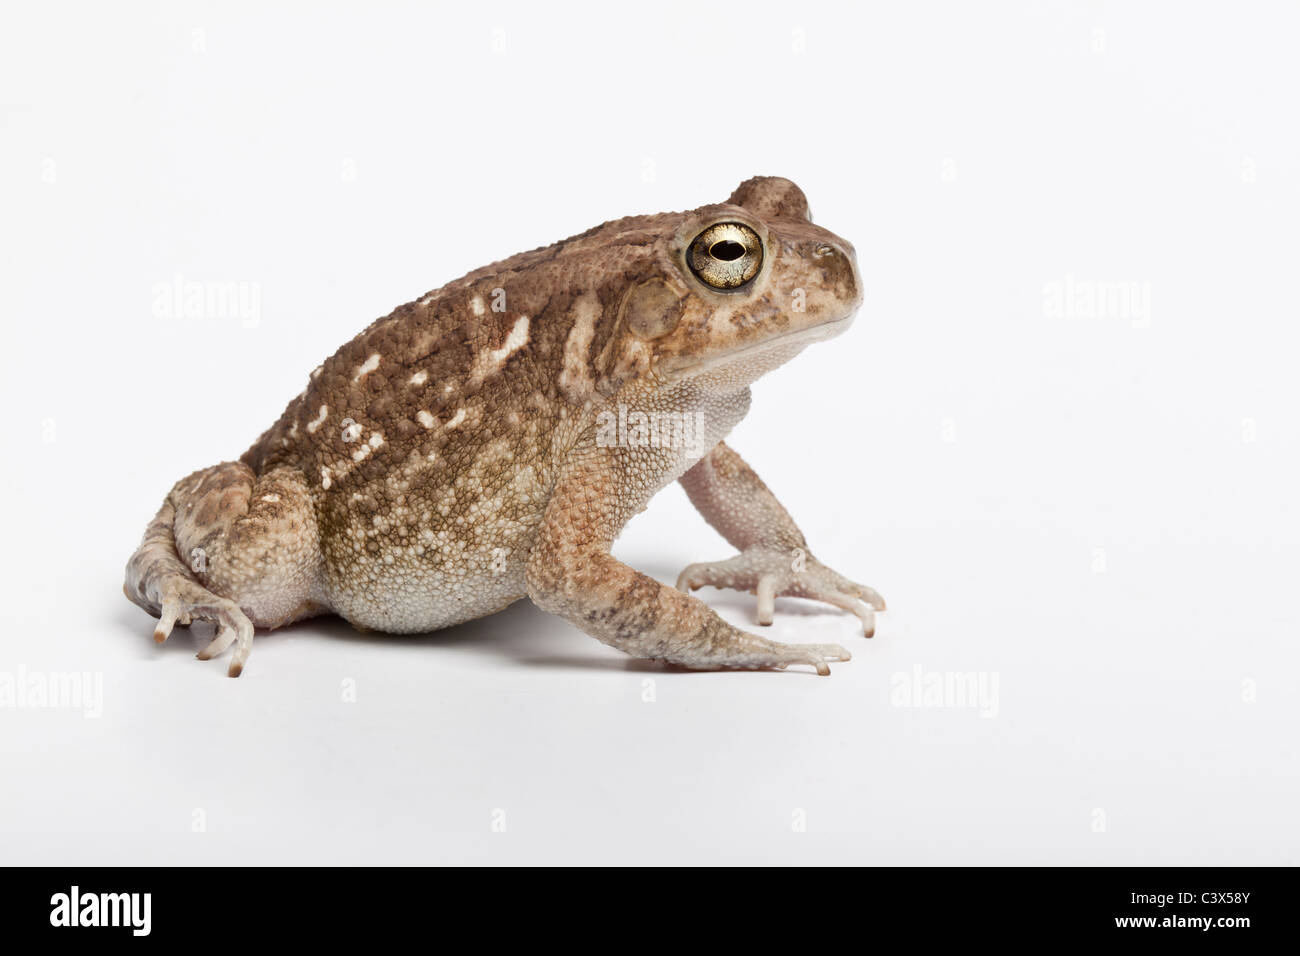 Square-marked toad, or African common toad, Amietophrynus regularis, formerly Bufo regularis, Africa. Stock Photo